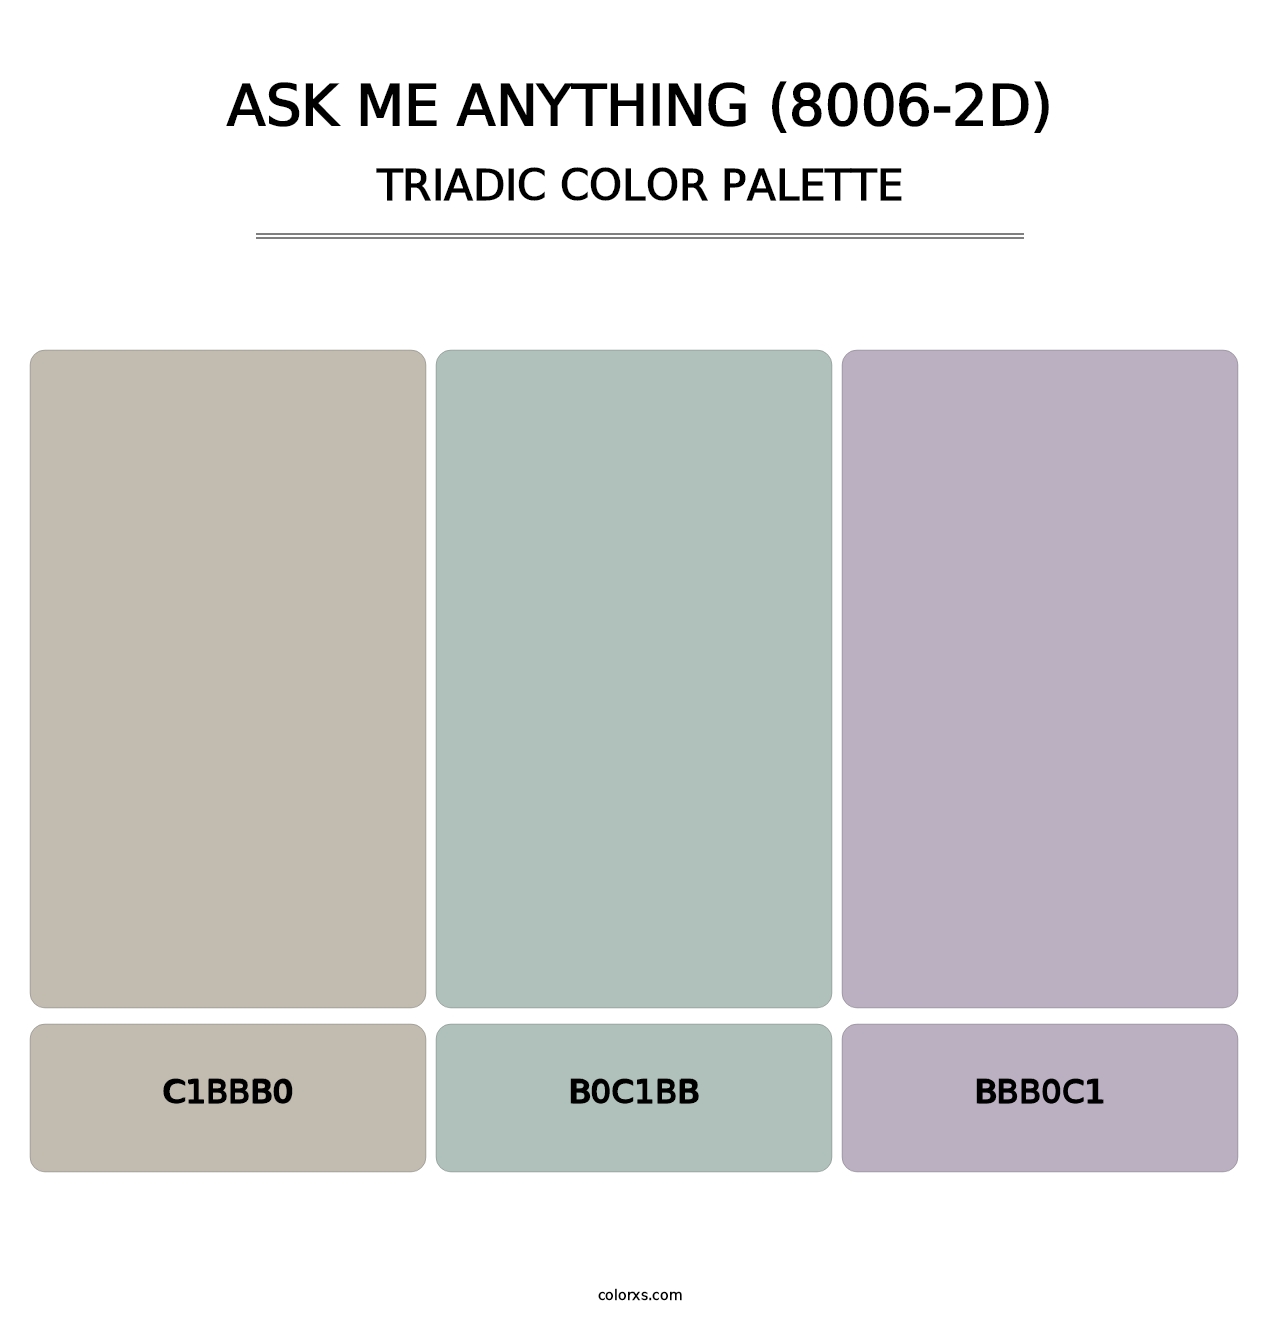 Ask Me Anything (8006-2D) - Triadic Color Palette